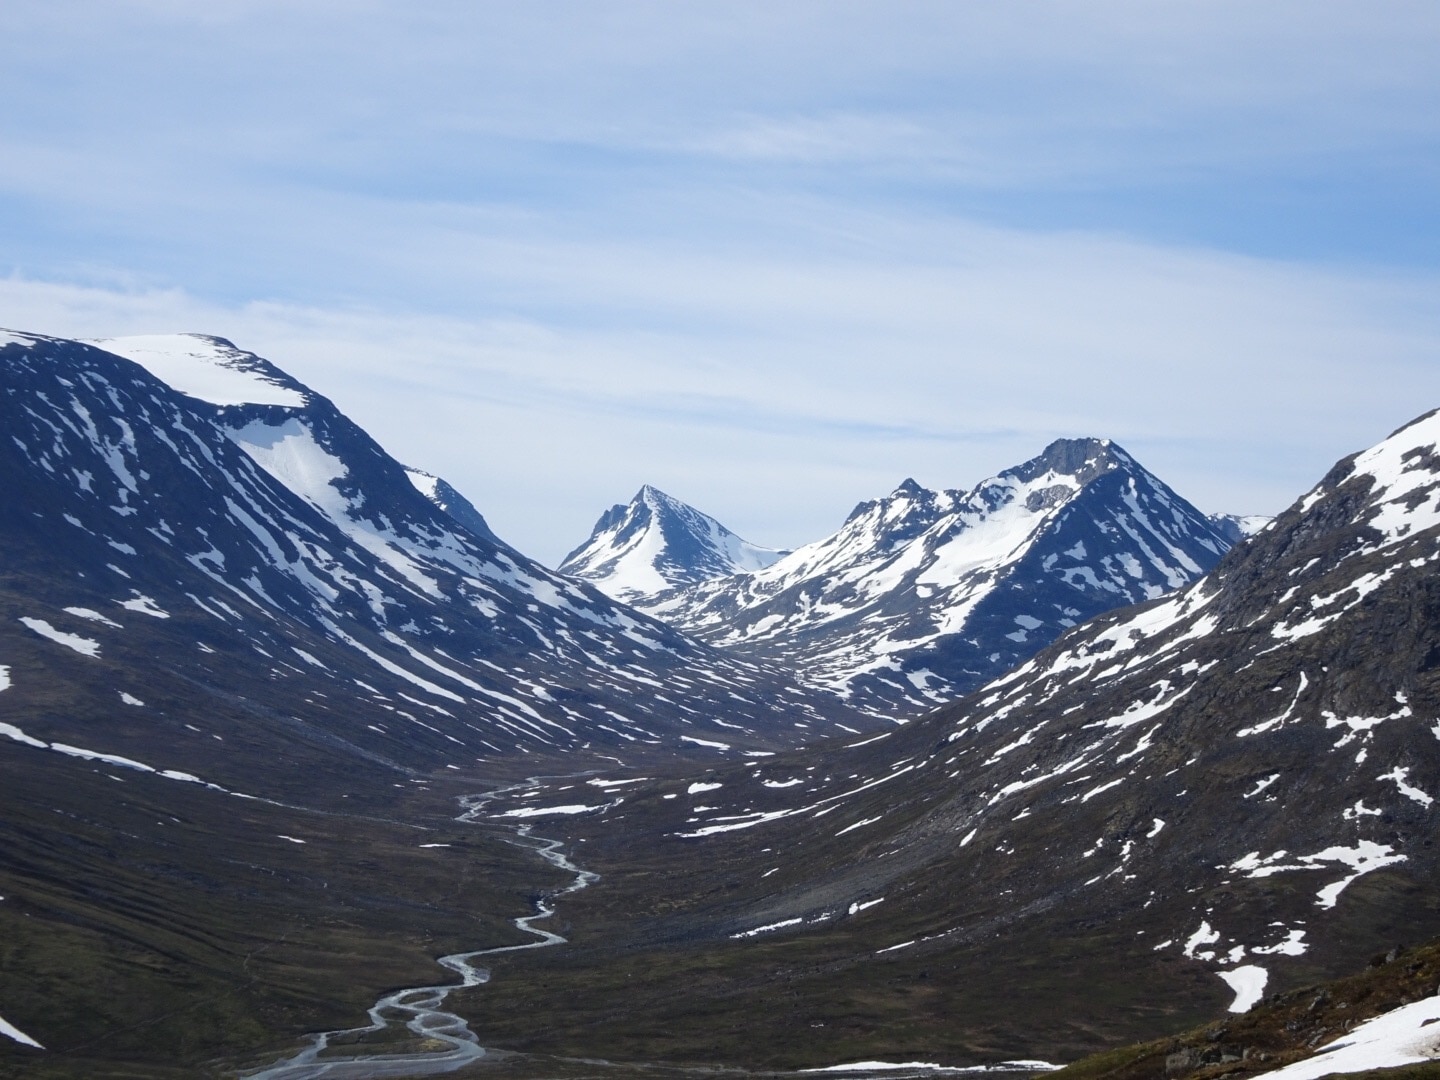 Jotunheimen, or "The Home of Giants" contains Norway's highest peaks, including Galdhøpiggen, the tallest mountain in all of Northern Europe. Taken while starting my hike of Galdhøpiggen from Spiterstulen campground🇳🇴
#norway
#jotunheimen
